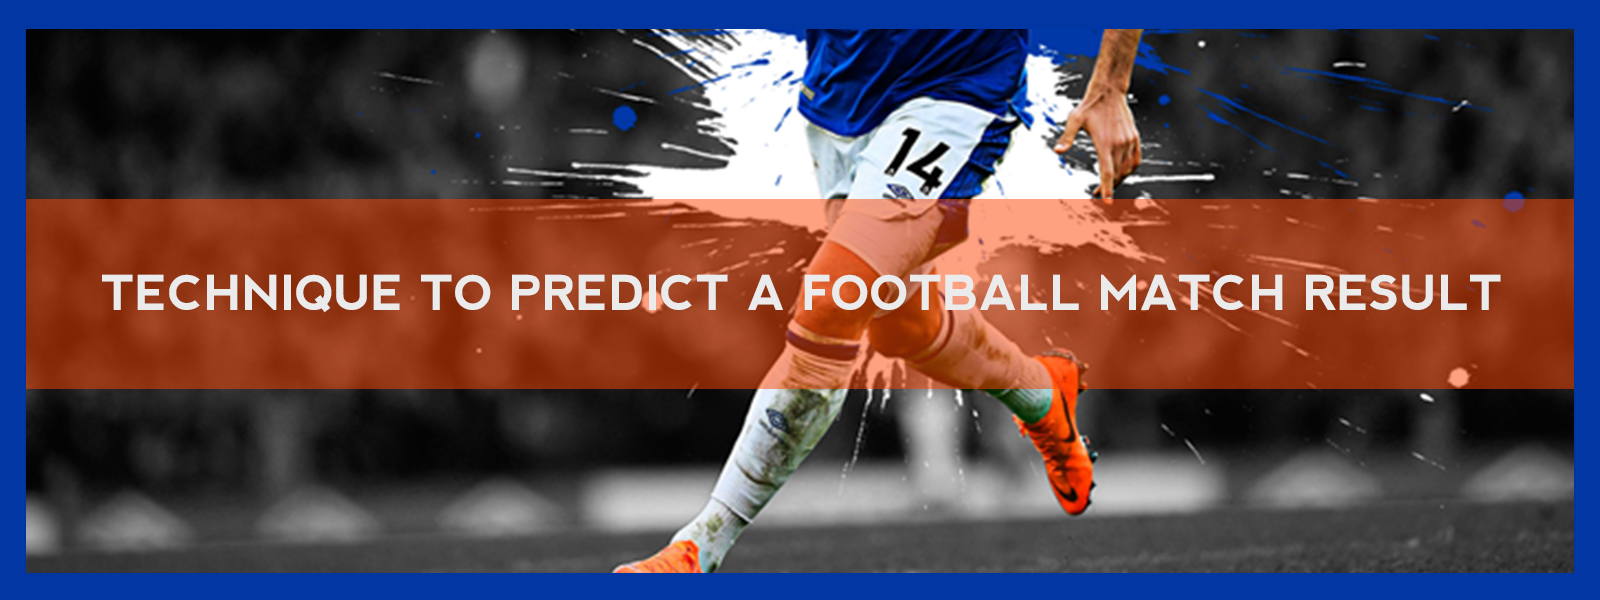 Technique to Predict a Football Match Result